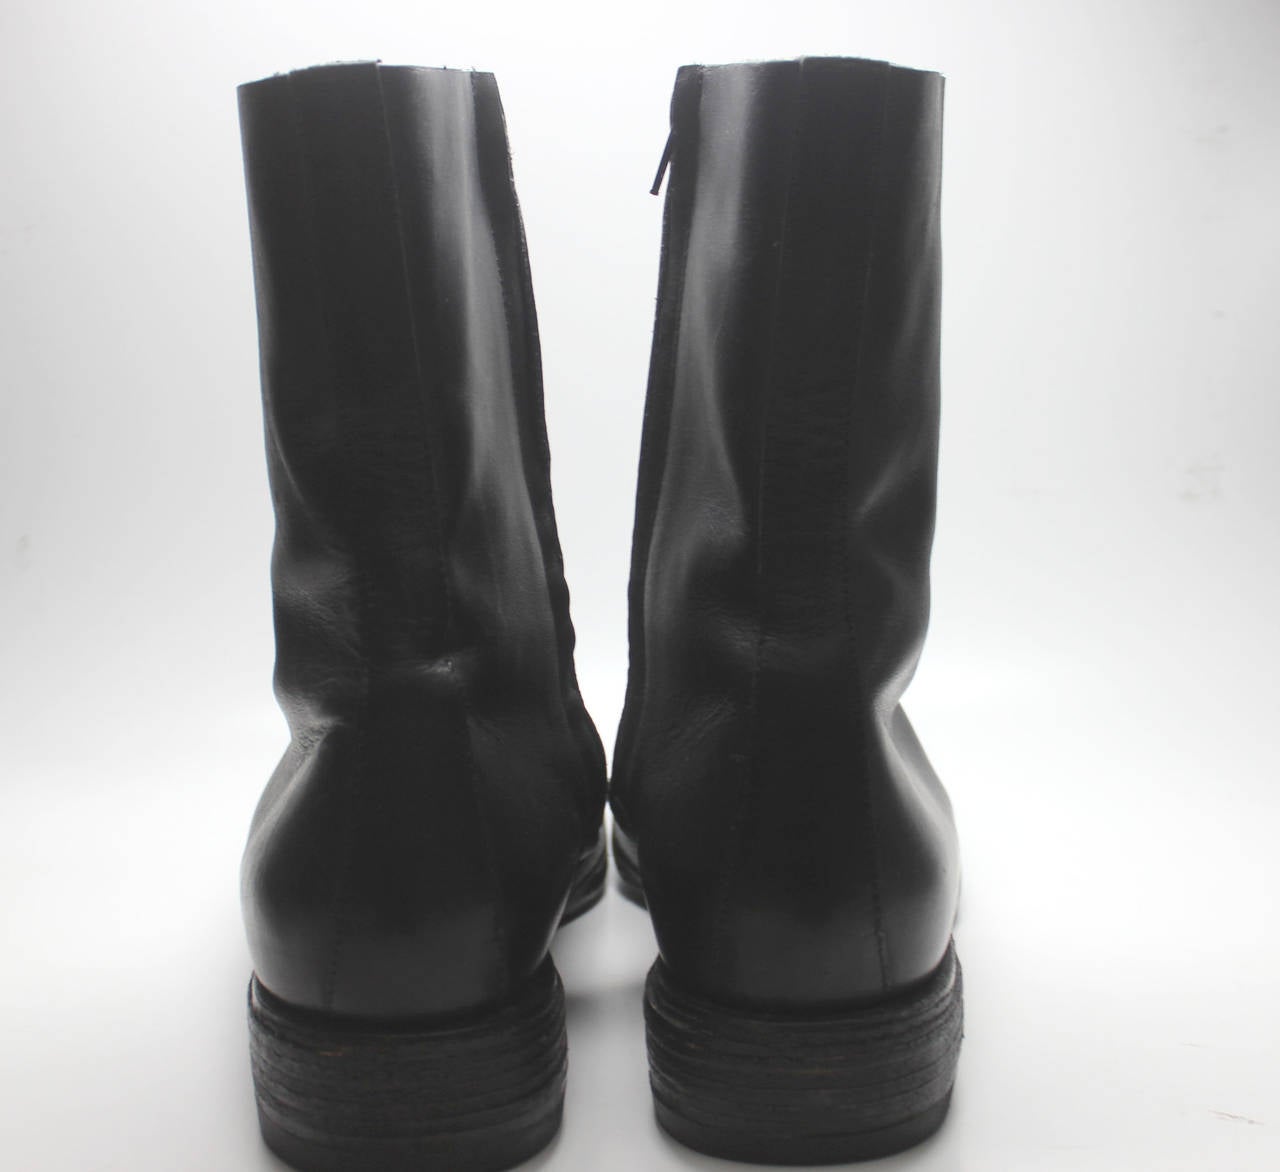 These boots dating from the 1990's have the label of Line 10, which is the mens equivalent of Line 1 in Margiela's design timeline. They are a classic chelsea boot with a side zip and square toe.